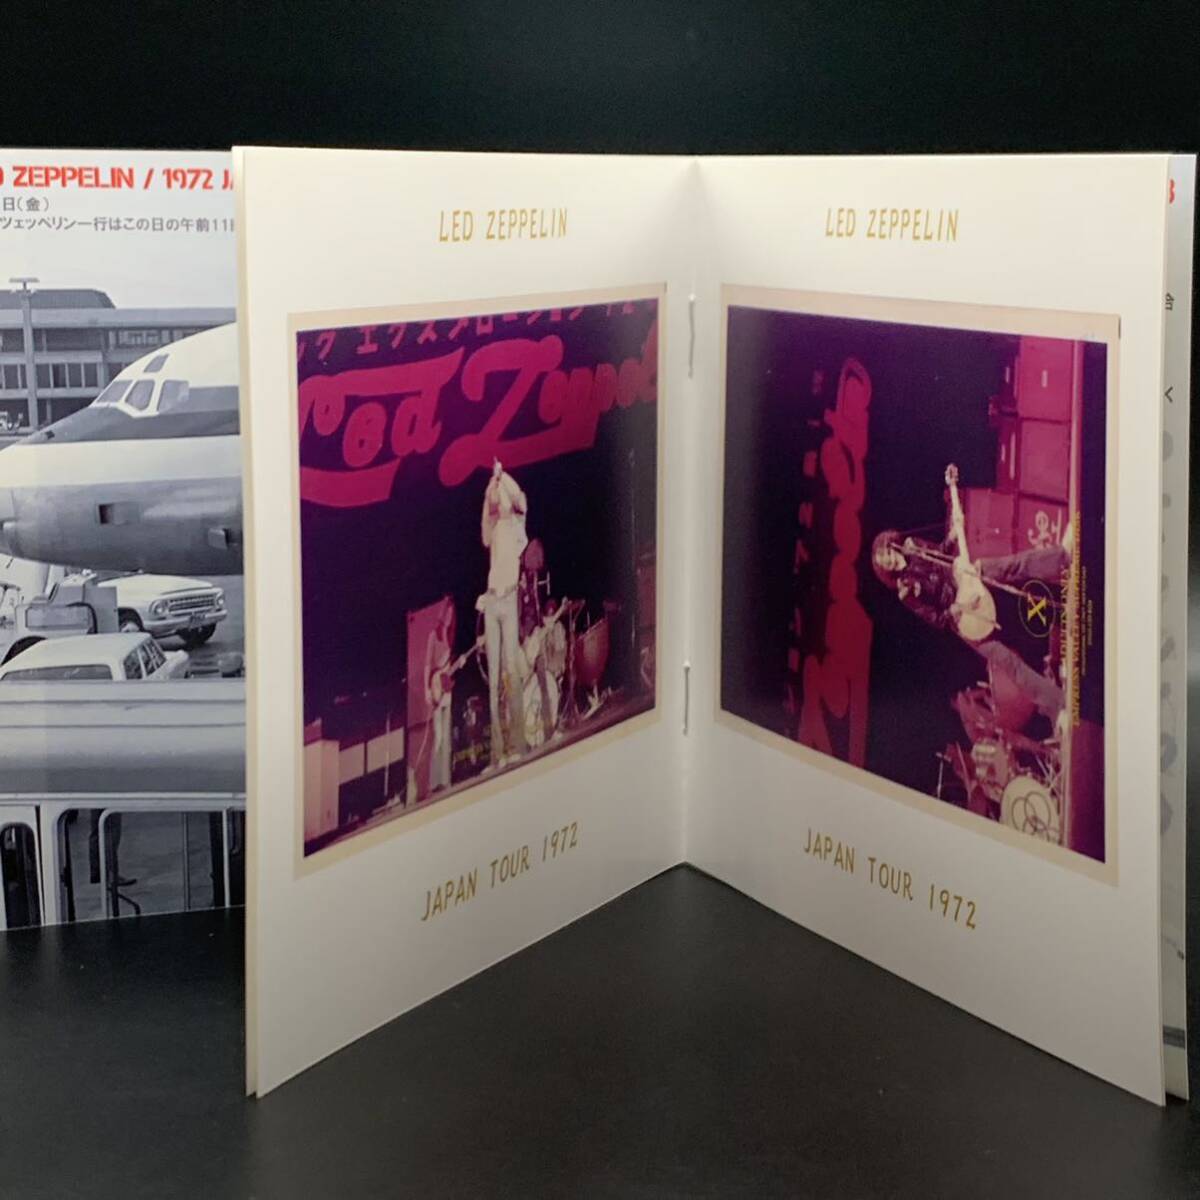 LED ZEPPELIN / JET STREAM - Pro Use Only 4CD Box with Booklet Set : Super Rare!! Hard to Find!! For enthusiastic collector only!!_画像6